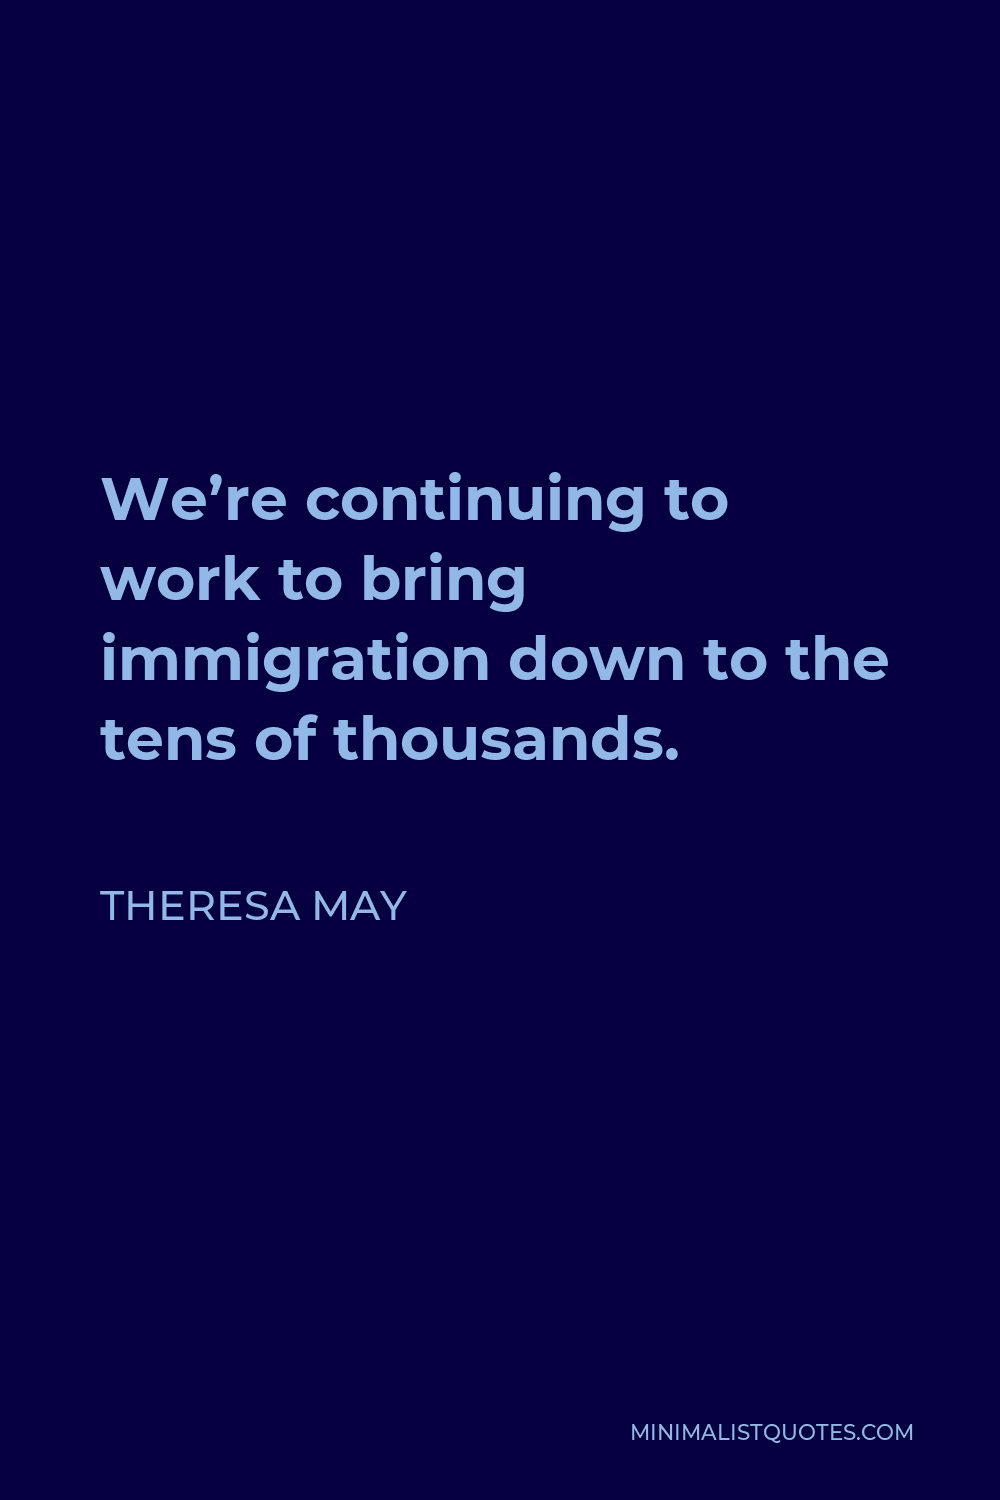 Theresa May Quote - We’re continuing to work to bring immigration down to the tens of thousands.